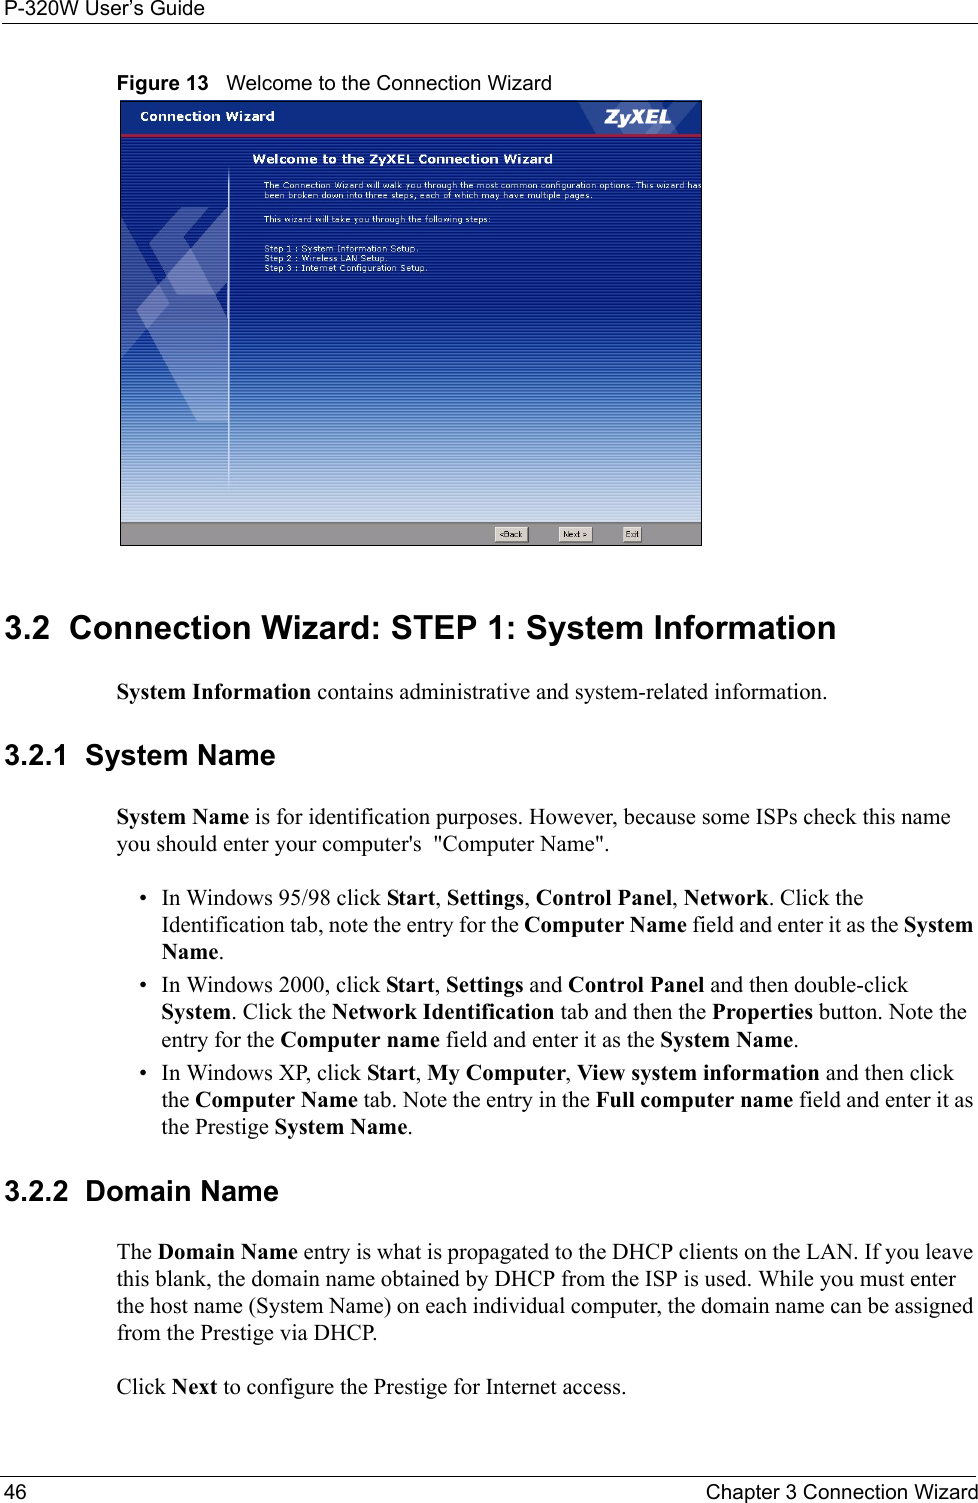 P-320W User’s Guide46  Chapter 3 Connection WizardFigure 13   Welcome to the Connection Wizard3.2  Connection Wizard: STEP 1: System InformationSystem Information contains administrative and system-related information.3.2.1  System NameSystem Name is for identification purposes. However, because some ISPs check this name you should enter your computer&apos;s  &quot;Computer Name&quot;. • In Windows 95/98 click Start, Settings, Control Panel, Network. Click the Identification tab, note the entry for the Computer Name field and enter it as the System Name.• In Windows 2000, click Start, Settings and Control Panel and then double-click System. Click the Network Identification tab and then the Properties button. Note the entry for the Computer name field and enter it as the System Name.• In Windows XP, click Start, My Computer, View system information and then click the Computer Name tab. Note the entry in the Full computer name field and enter it as the Prestige System Name.3.2.2  Domain NameThe Domain Name entry is what is propagated to the DHCP clients on the LAN. If you leave this blank, the domain name obtained by DHCP from the ISP is used. While you must enter the host name (System Name) on each individual computer, the domain name can be assigned from the Prestige via DHCP.Click Next to configure the Prestige for Internet access.